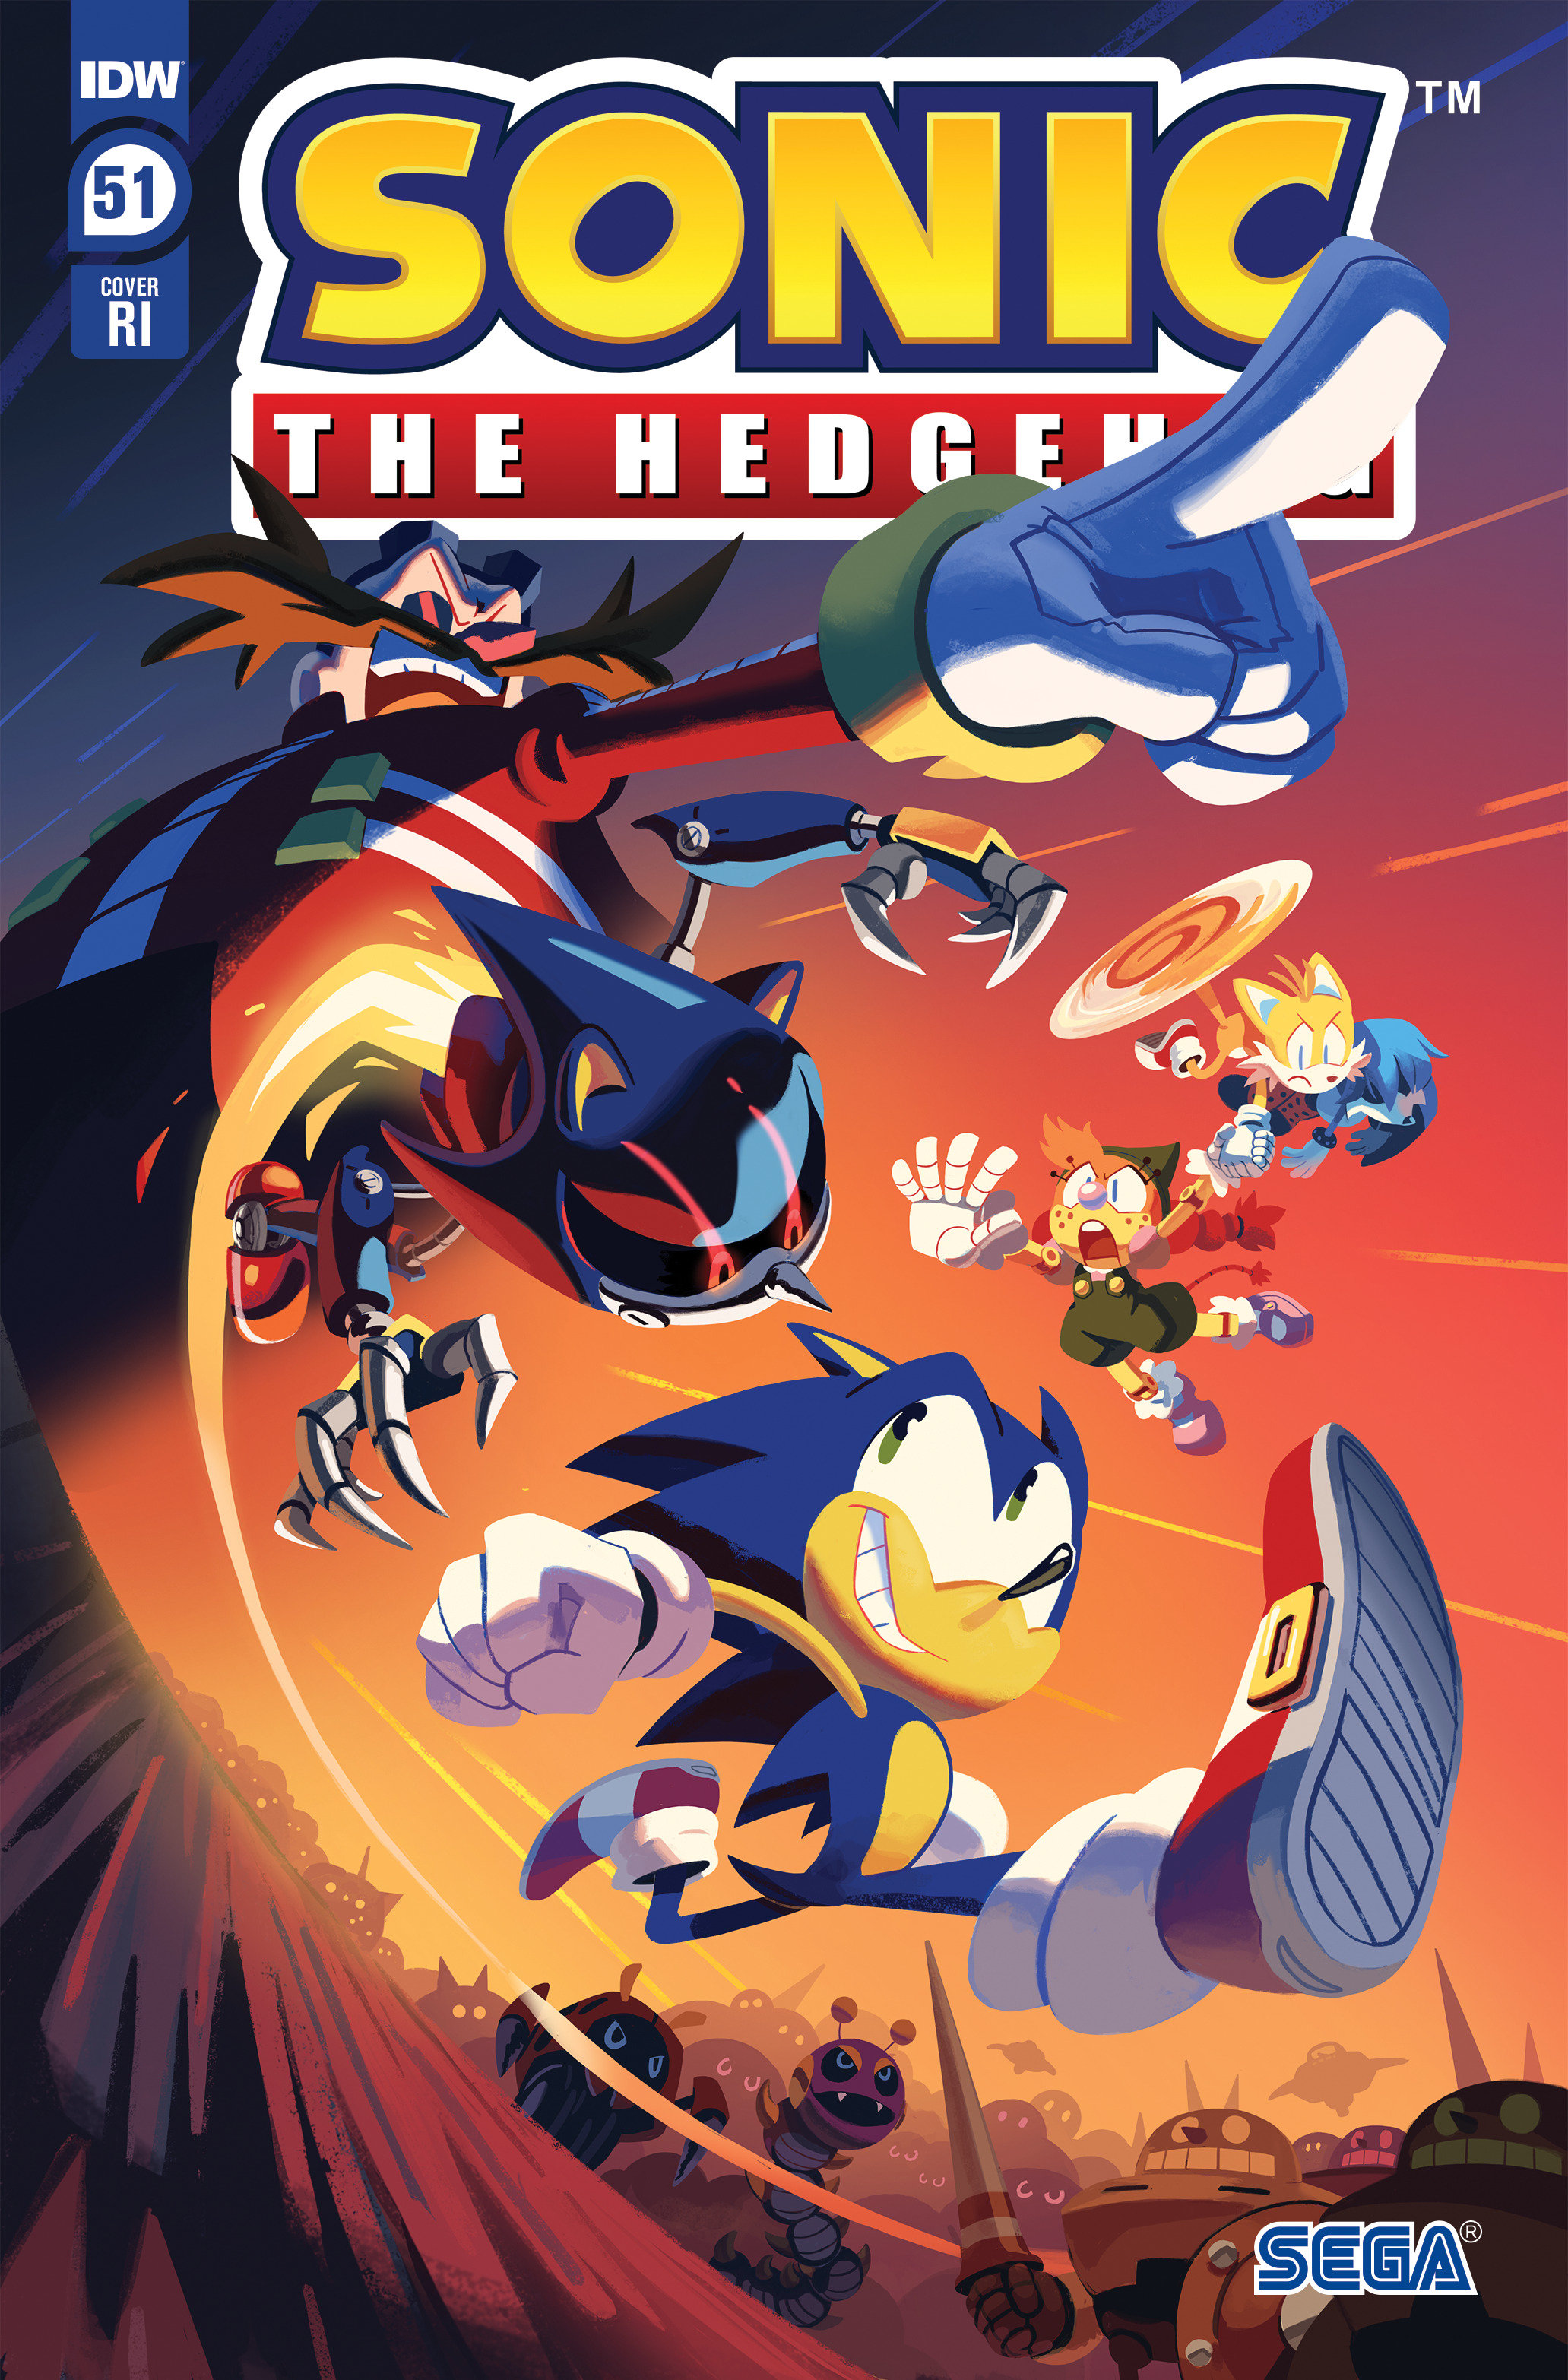 Sonic the Hedgehog #51 Cover Retailer Incentive Fourdraine 1 For 10 Variant